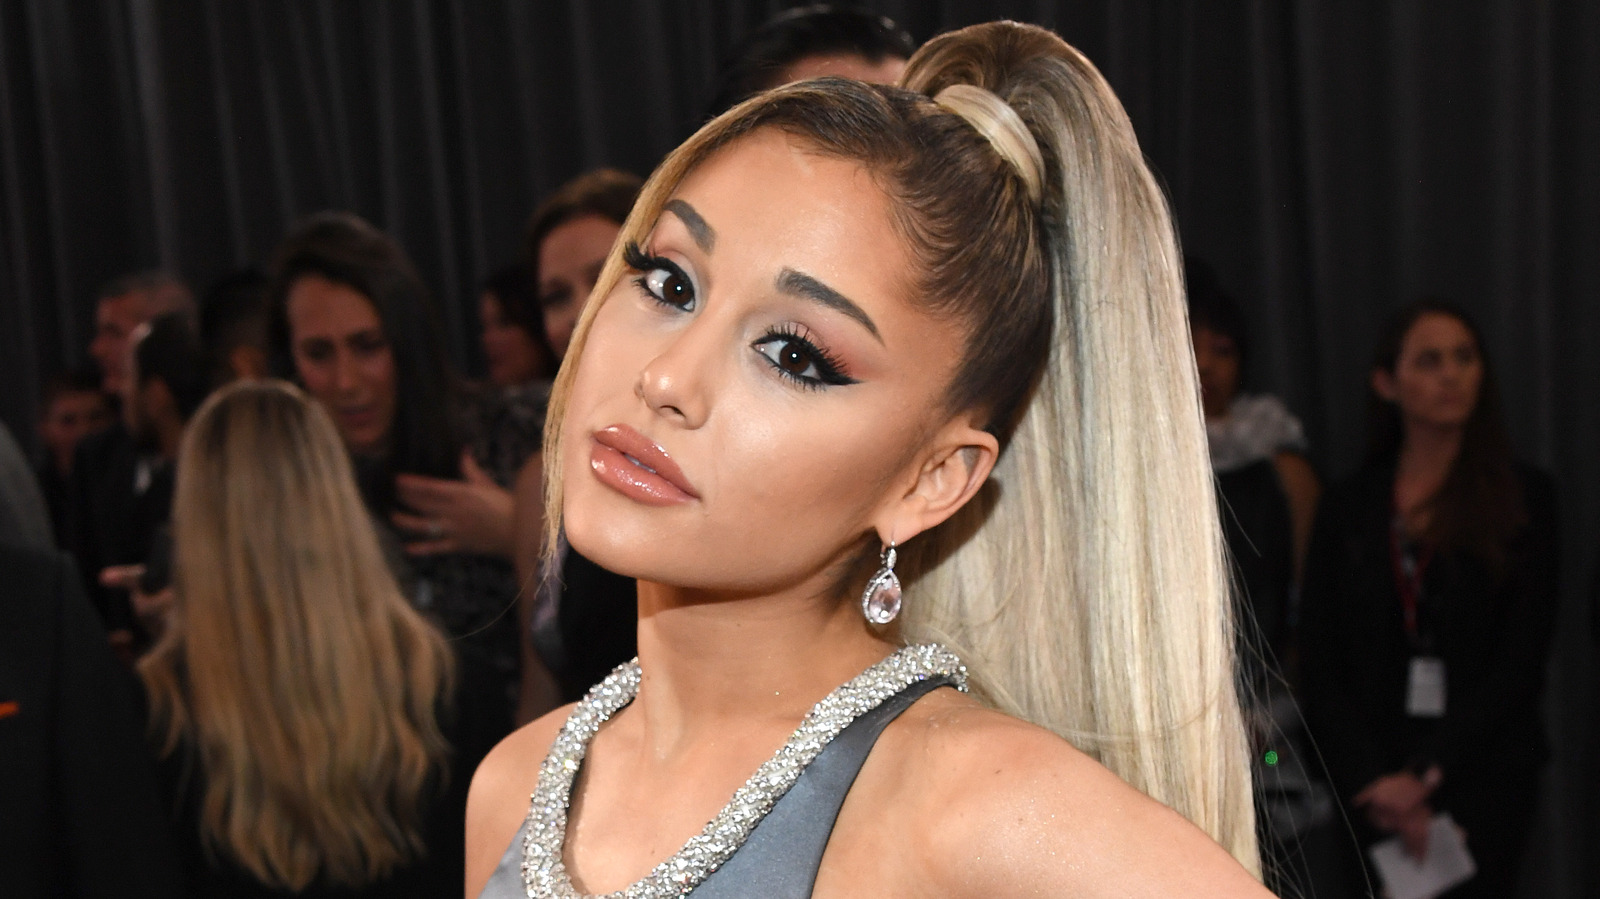 Ariana Grande Breaks Silence On Concerns About Her Changed Appearance